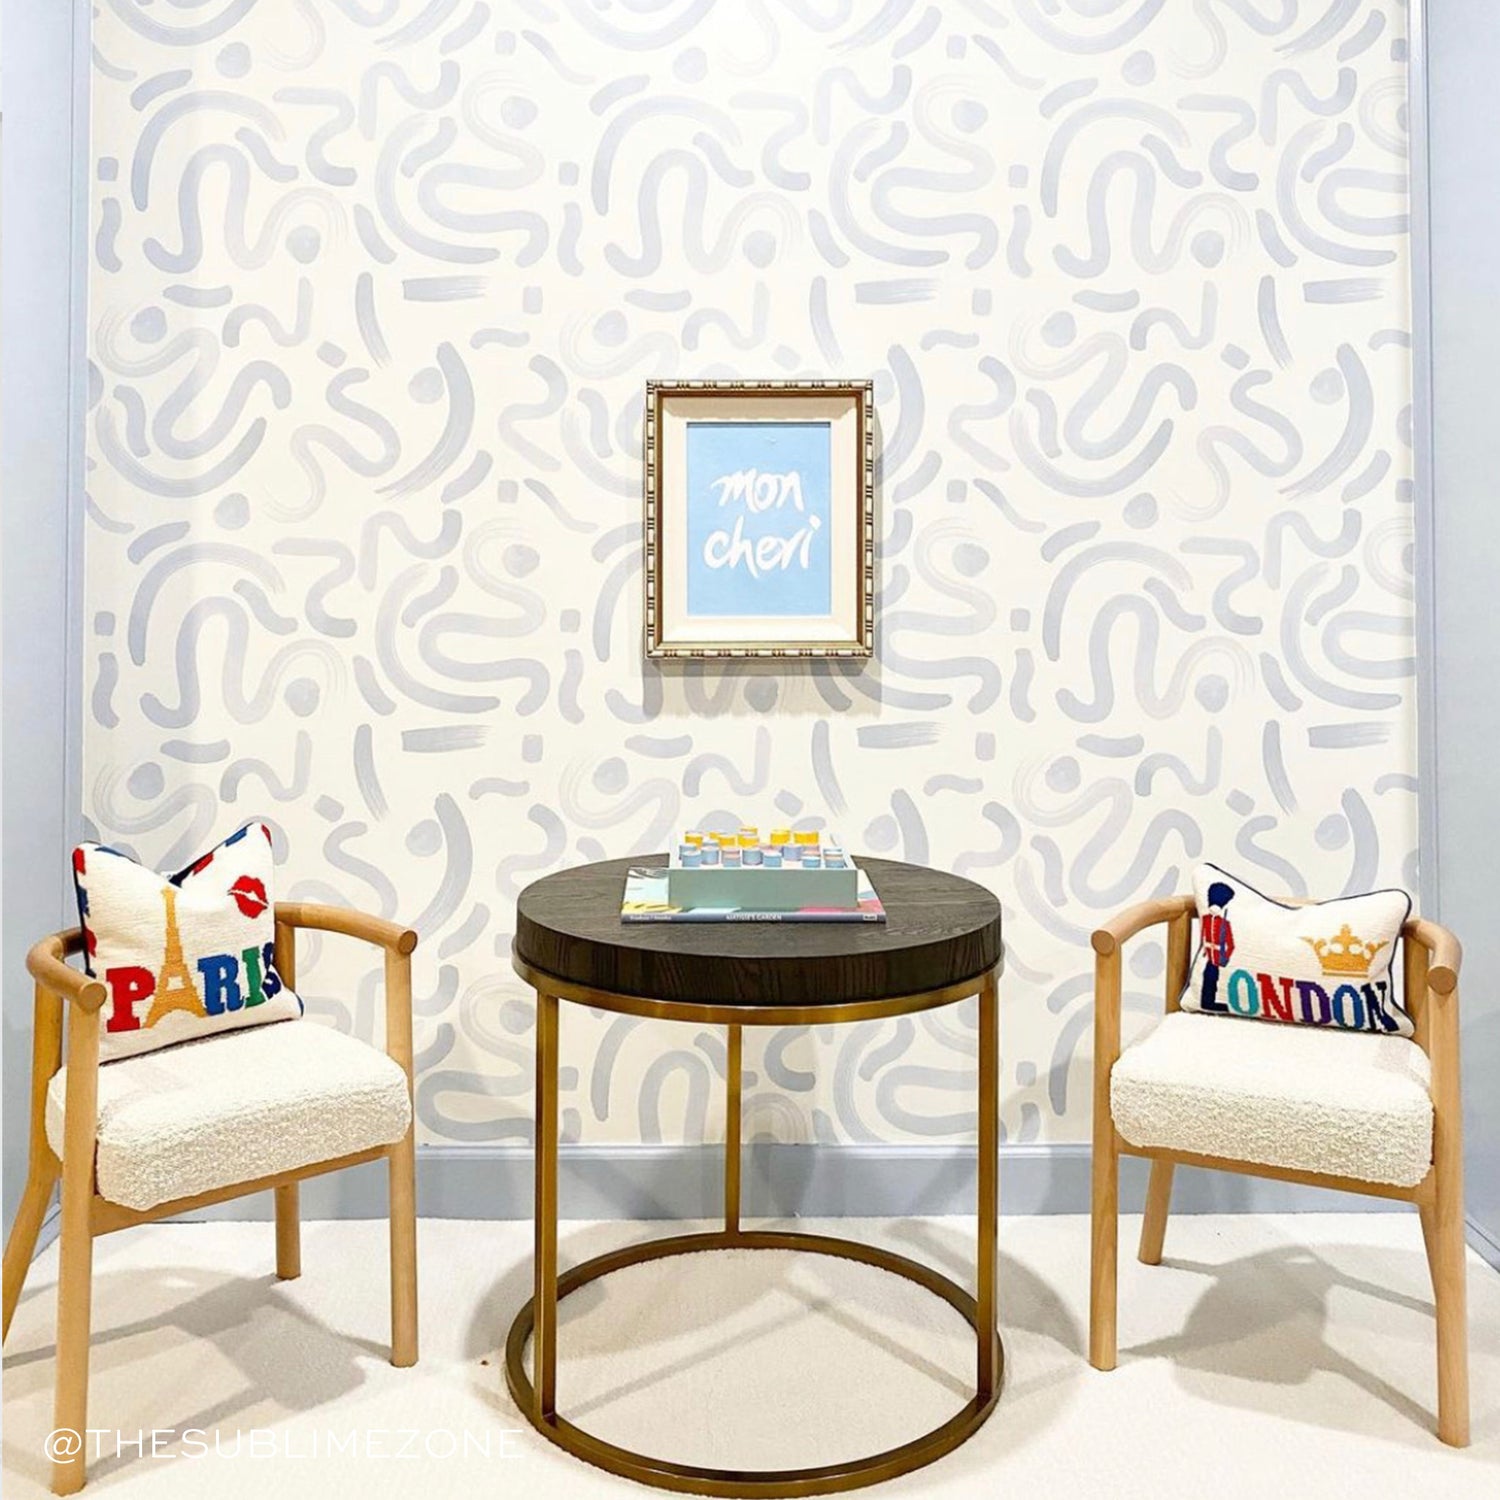 Room corner styled with Sky Blue Printed Wallpaper with frame hung in the middle over wooden coffee table and two wooden chairs surrounding it. Photo taken by The Sublime Zone